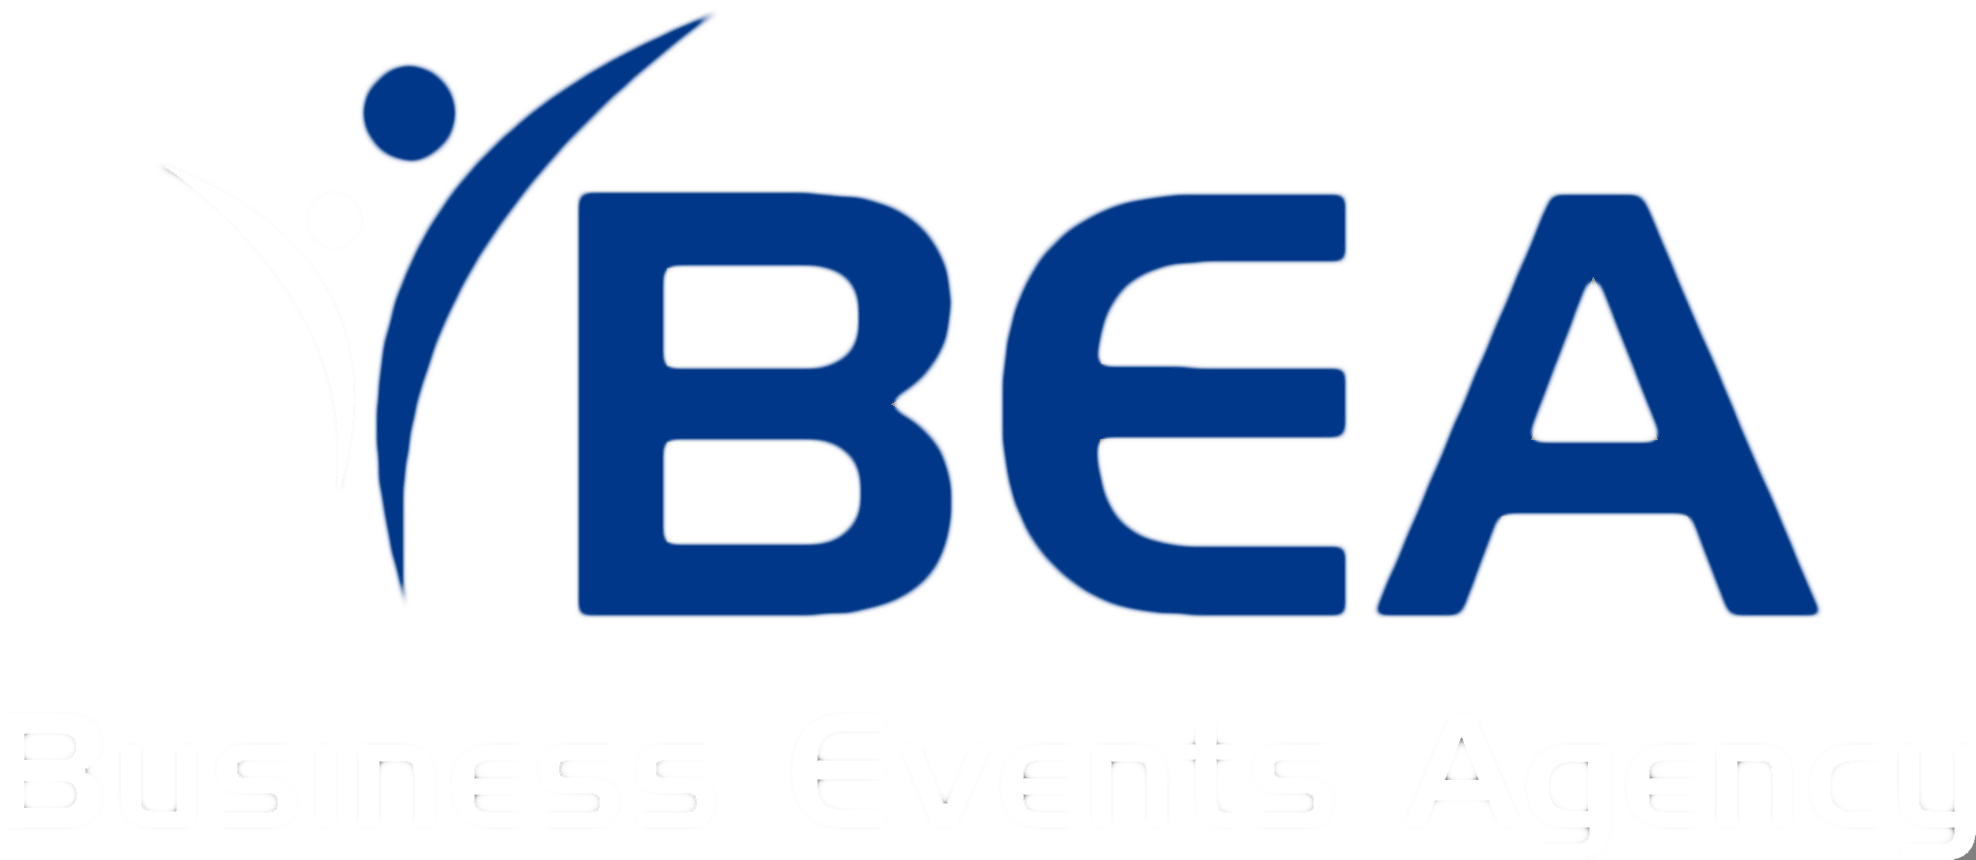 Business Events Agency